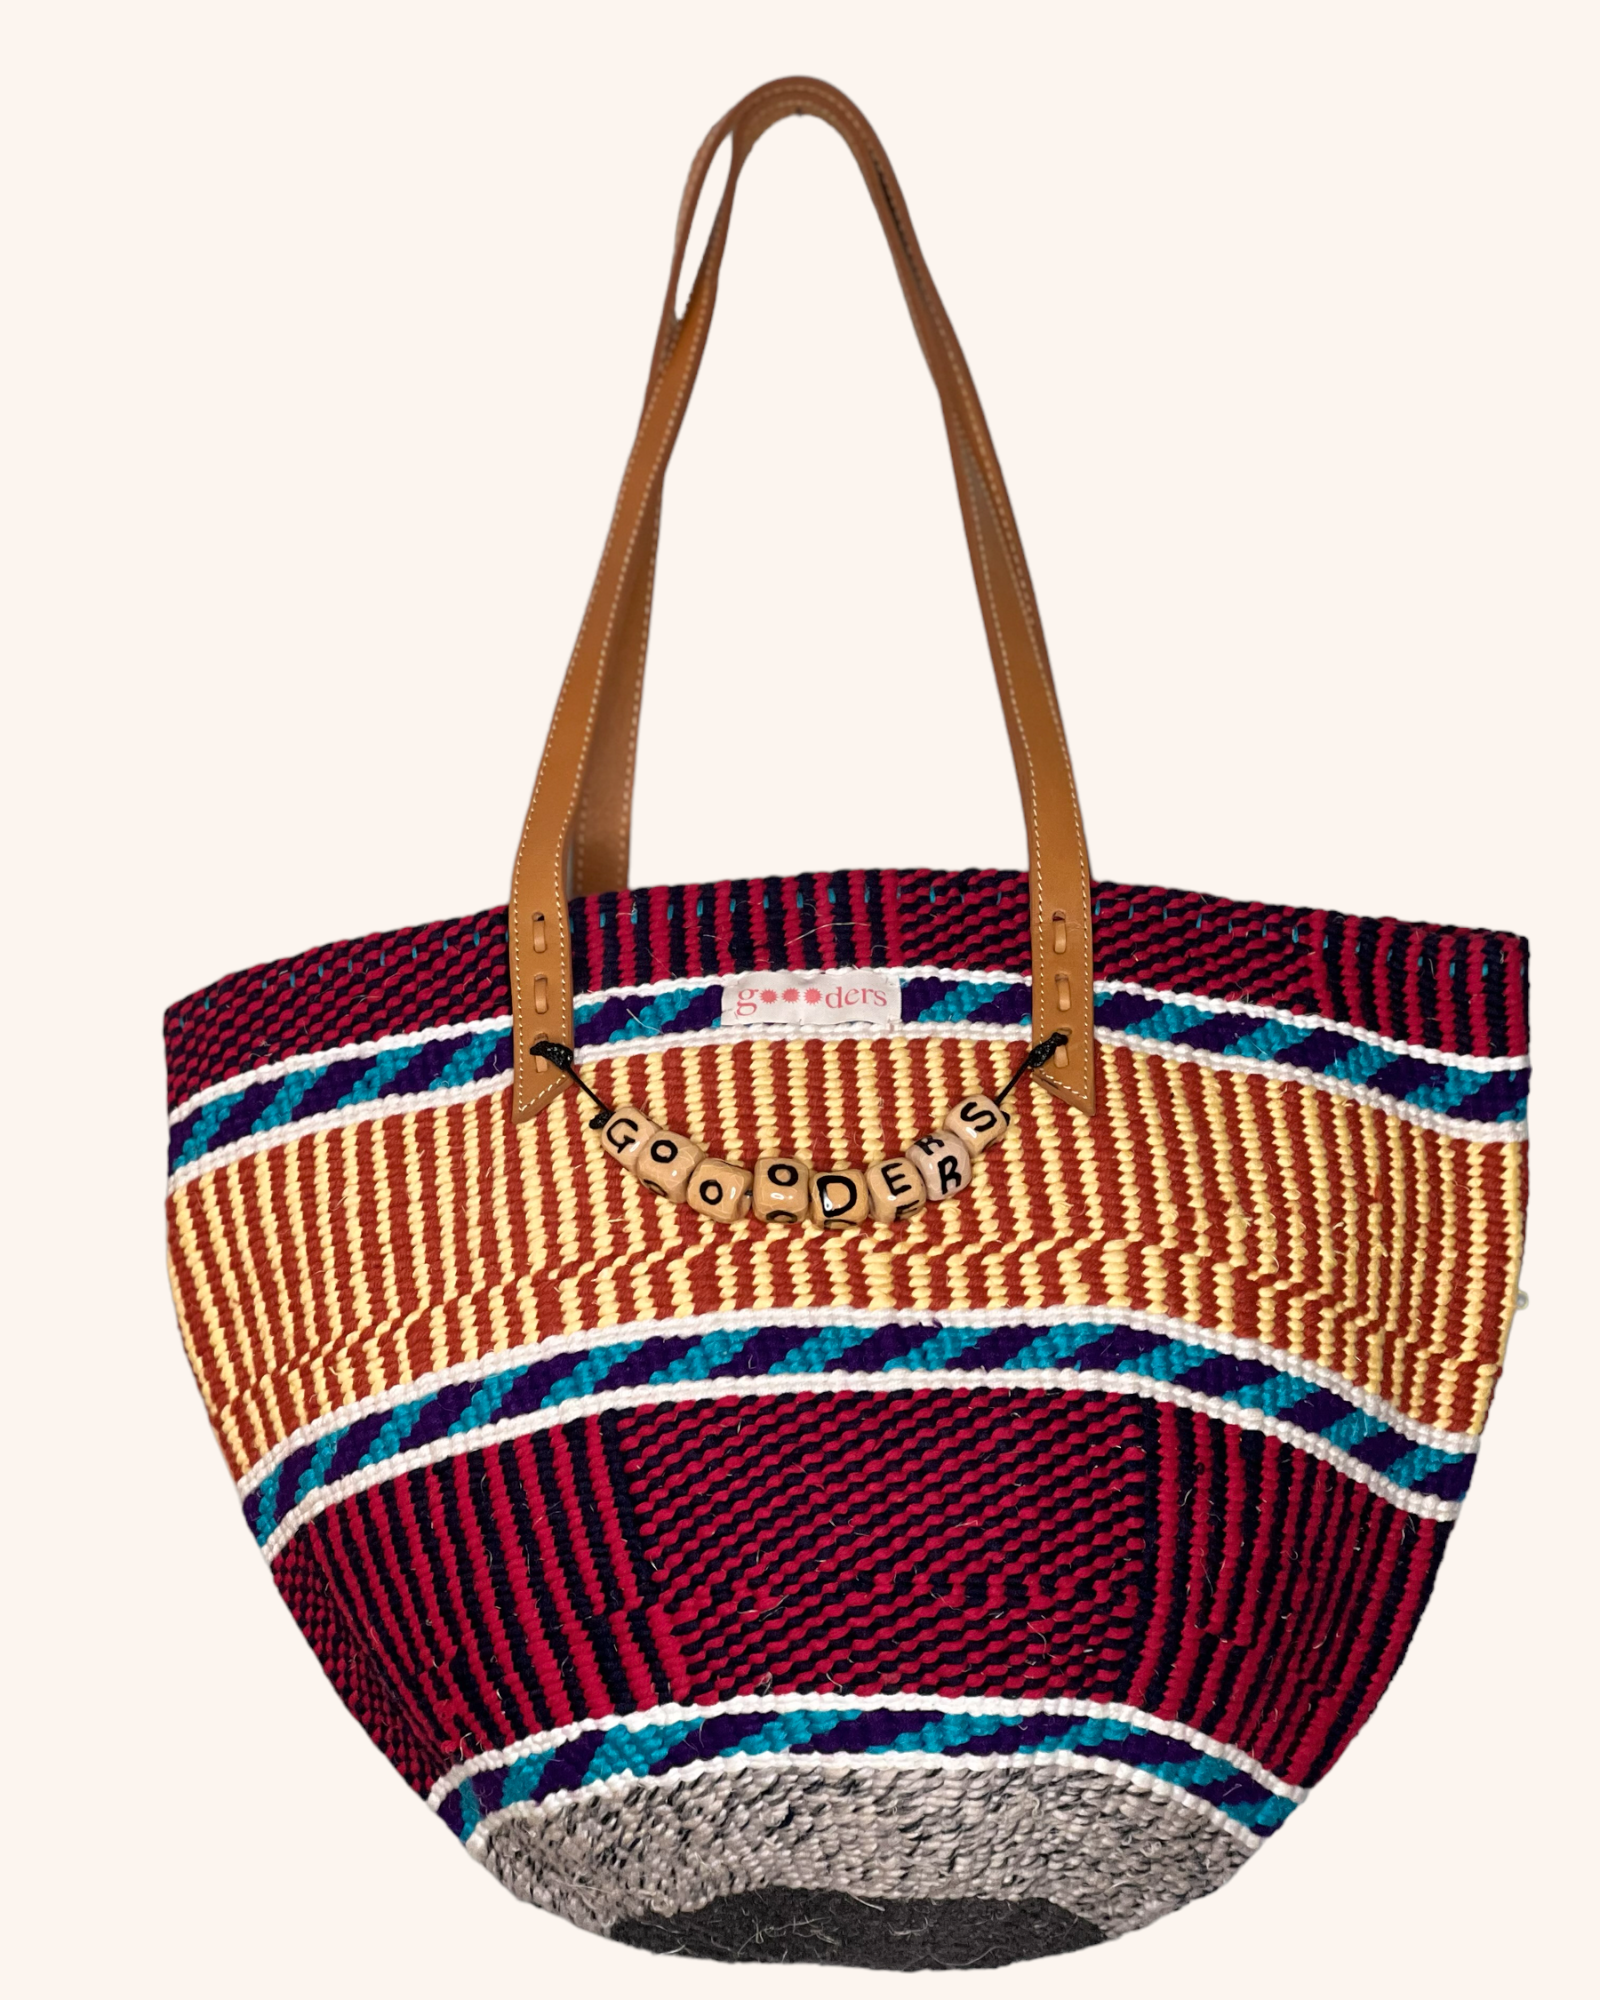 wool and leather tote bag thuvien.quangtri.gov.vn